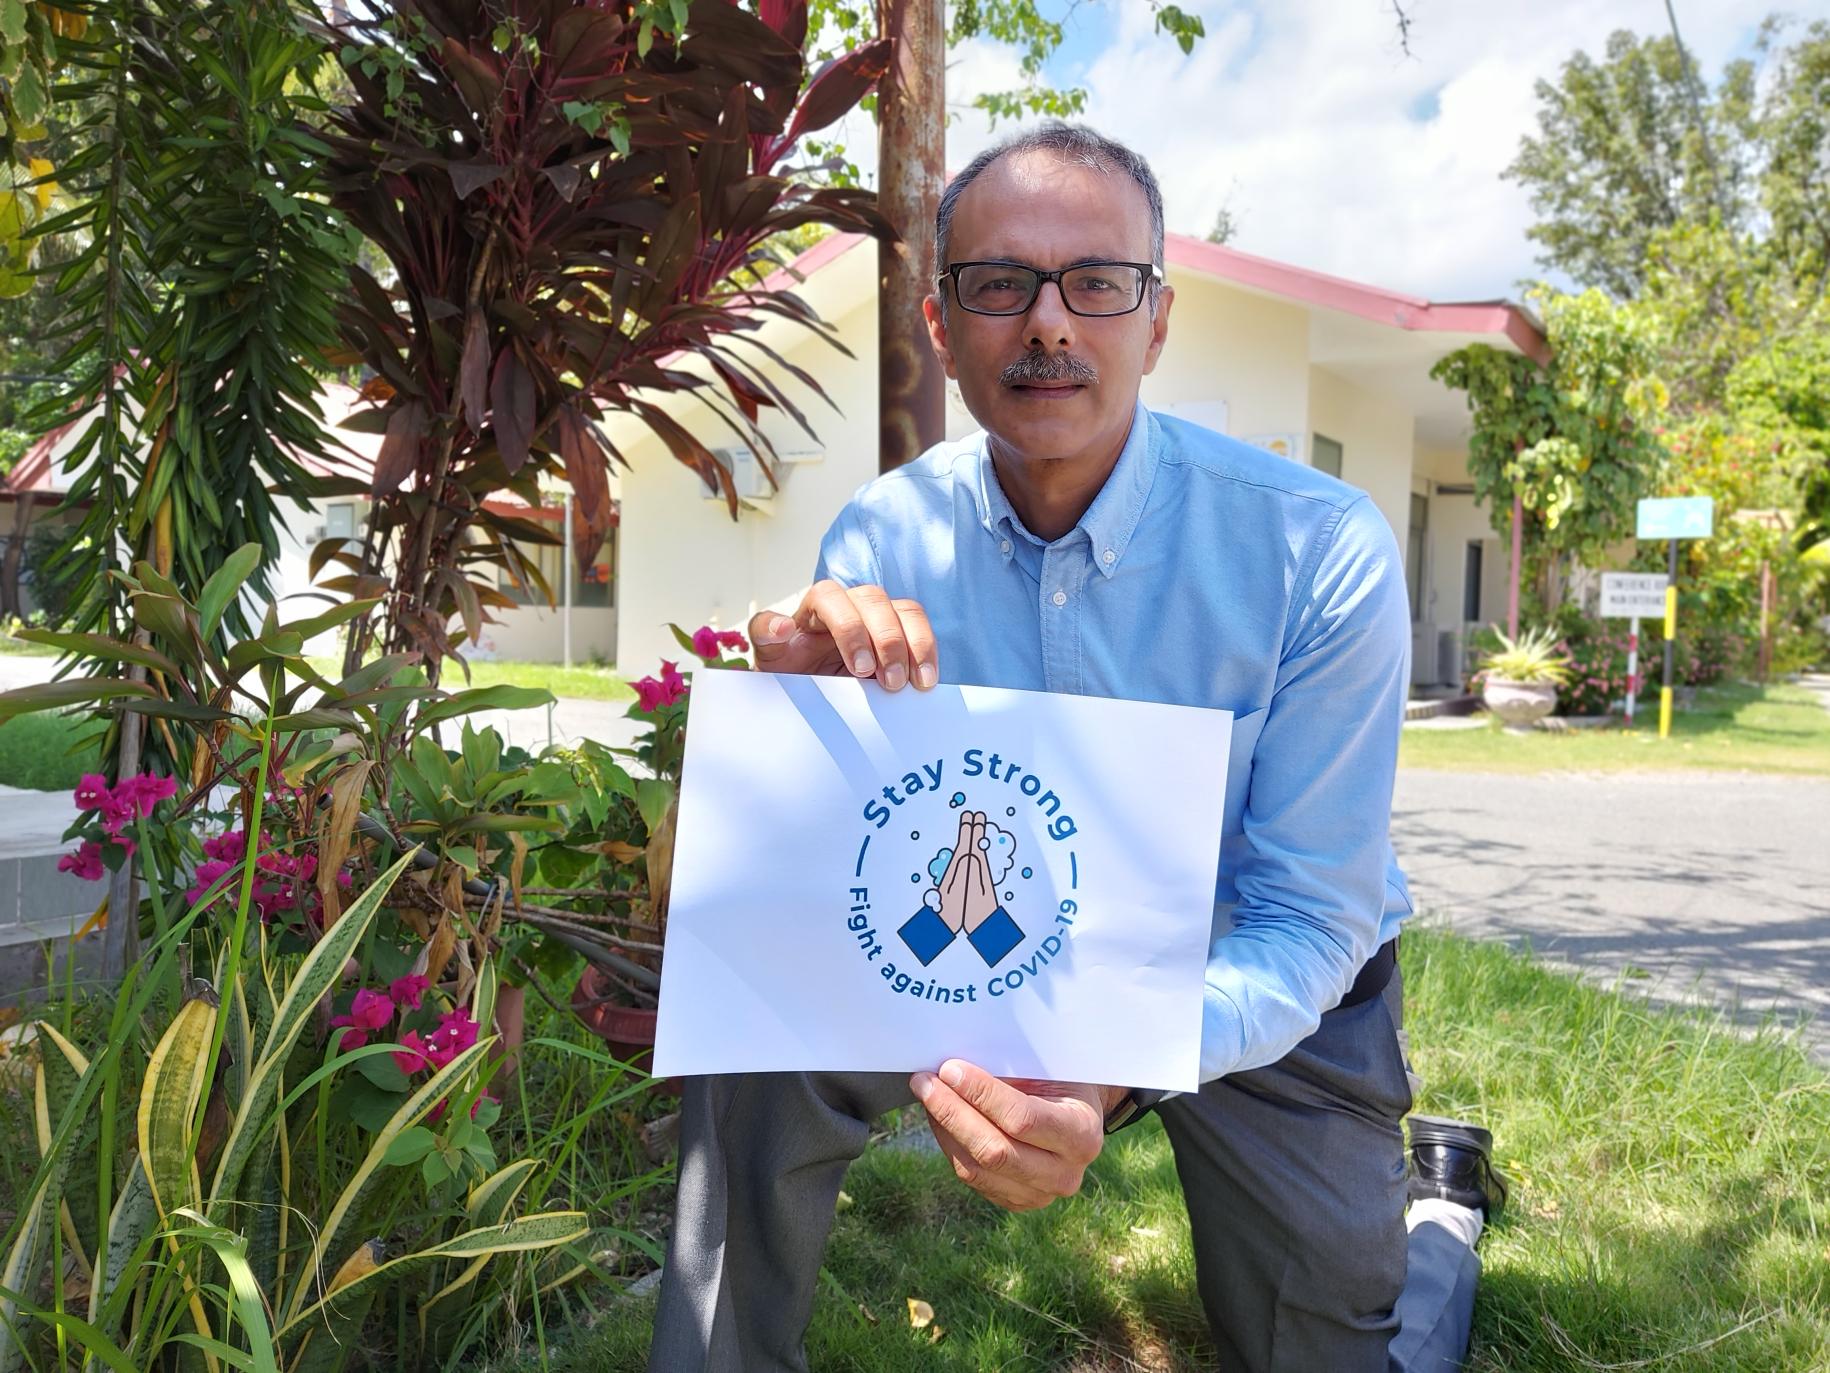 Outgoing Resident Coordinator of Timor-Leste, Roy Trivedy, has led the UN country team in scaling up the Government's response to COVID-19, including through encouraging preventive measures like hand washin